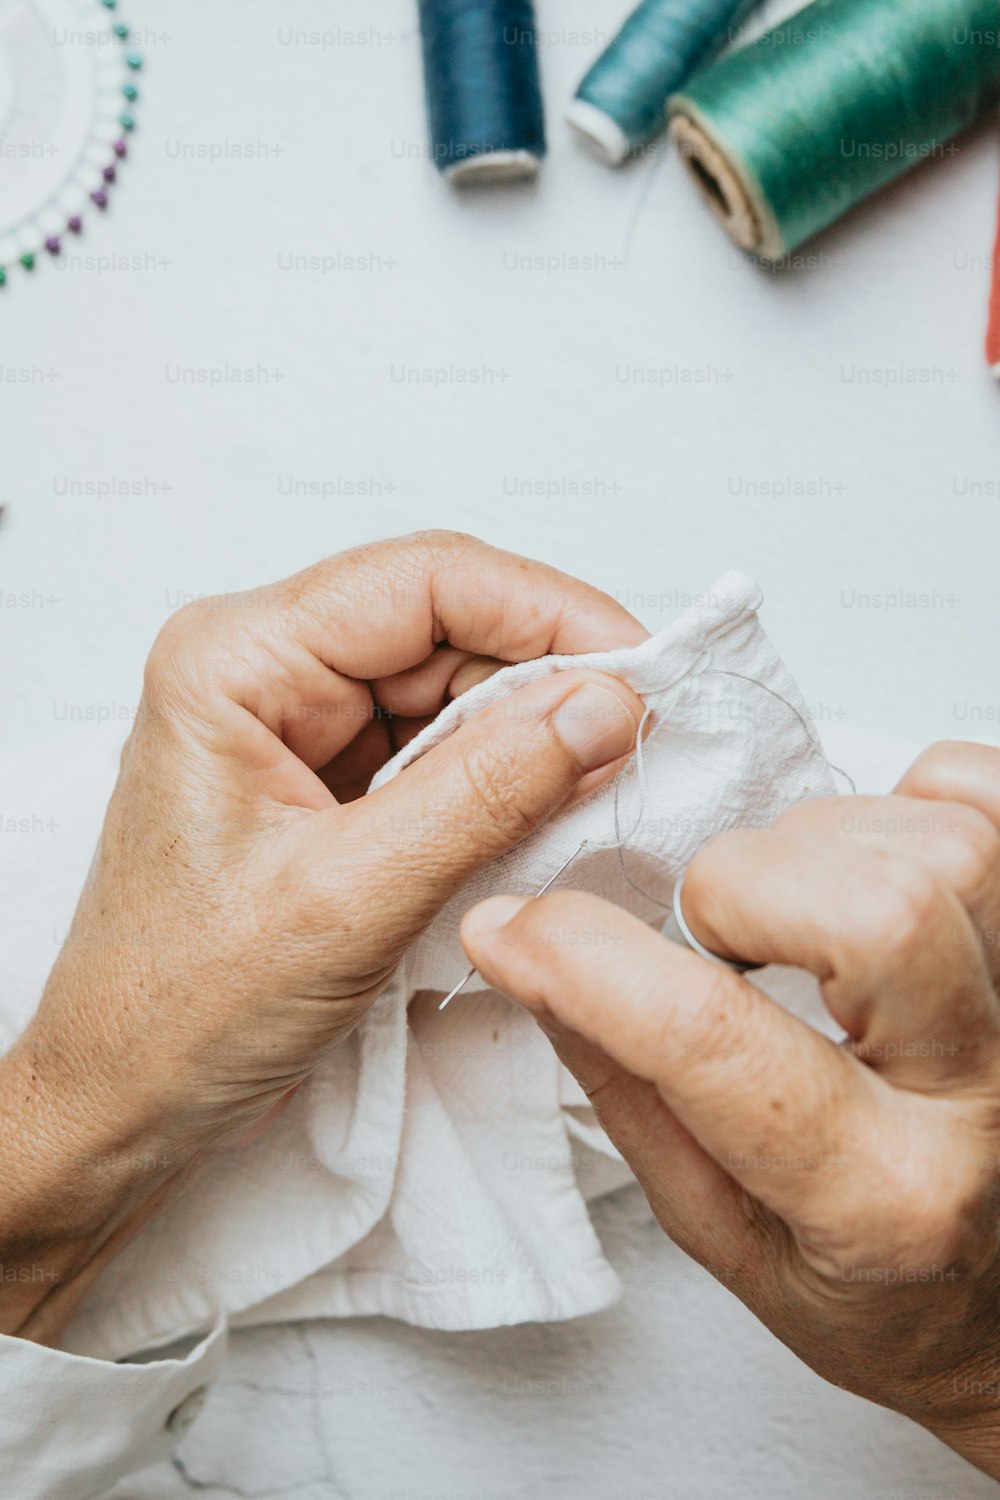 a person is sewing on a piece of cloth